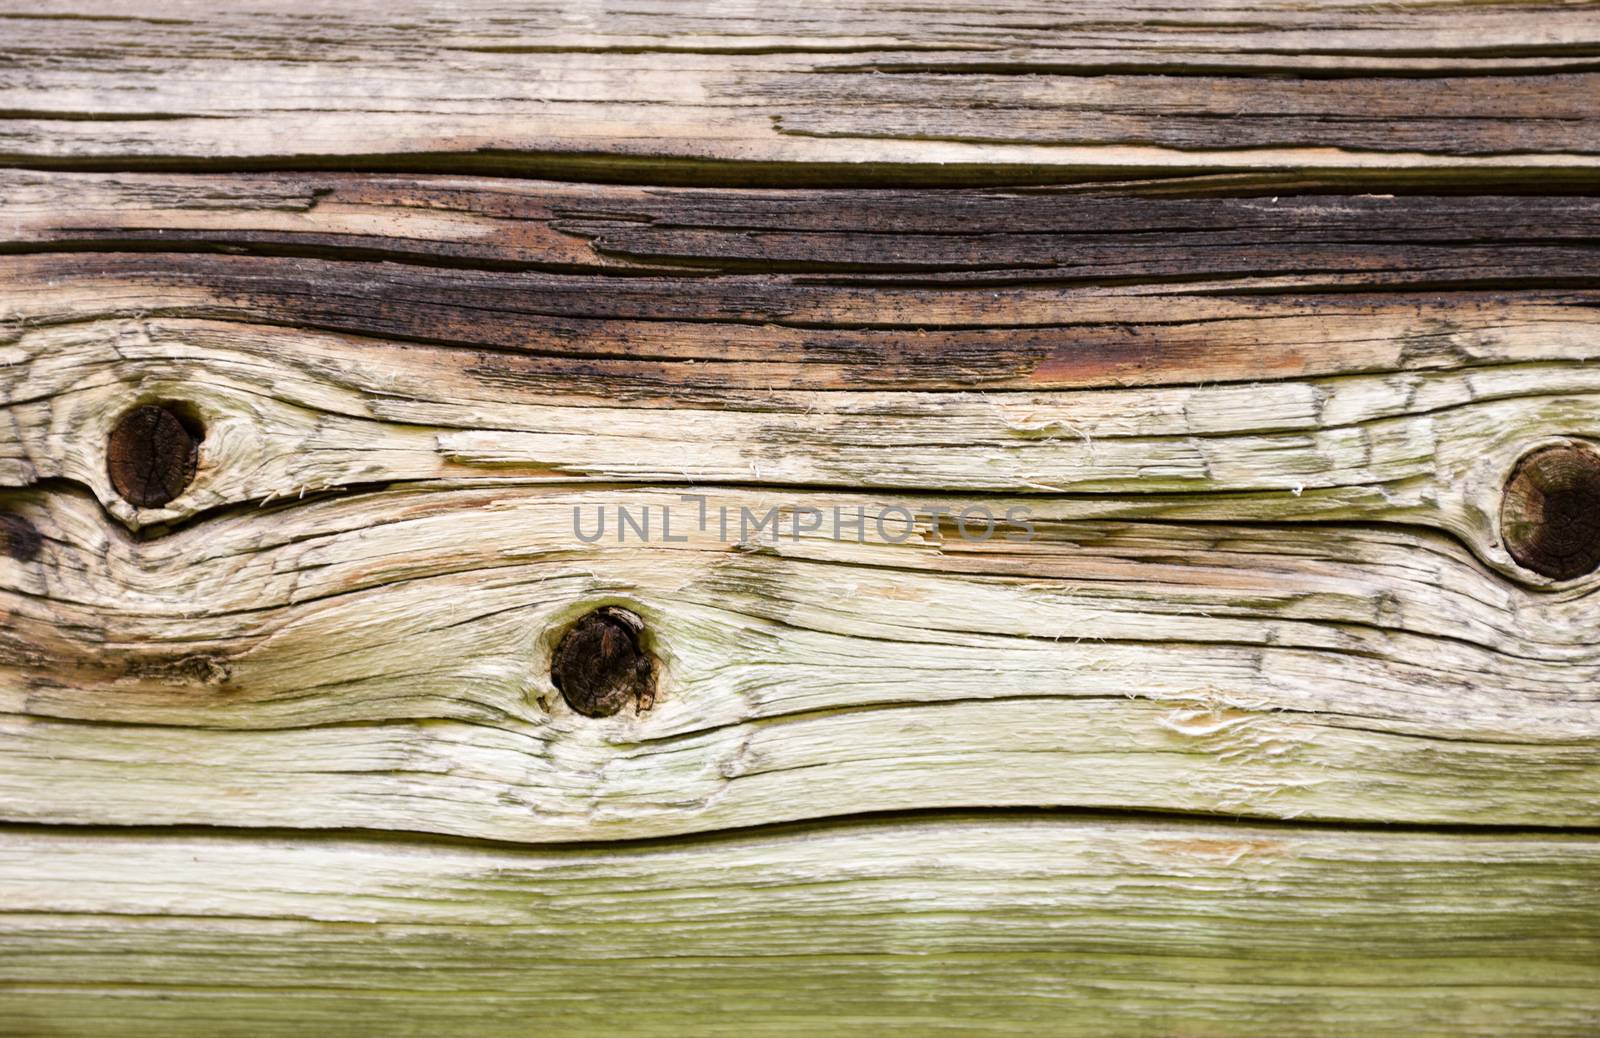 The wall of the old log house. Wooden texture.